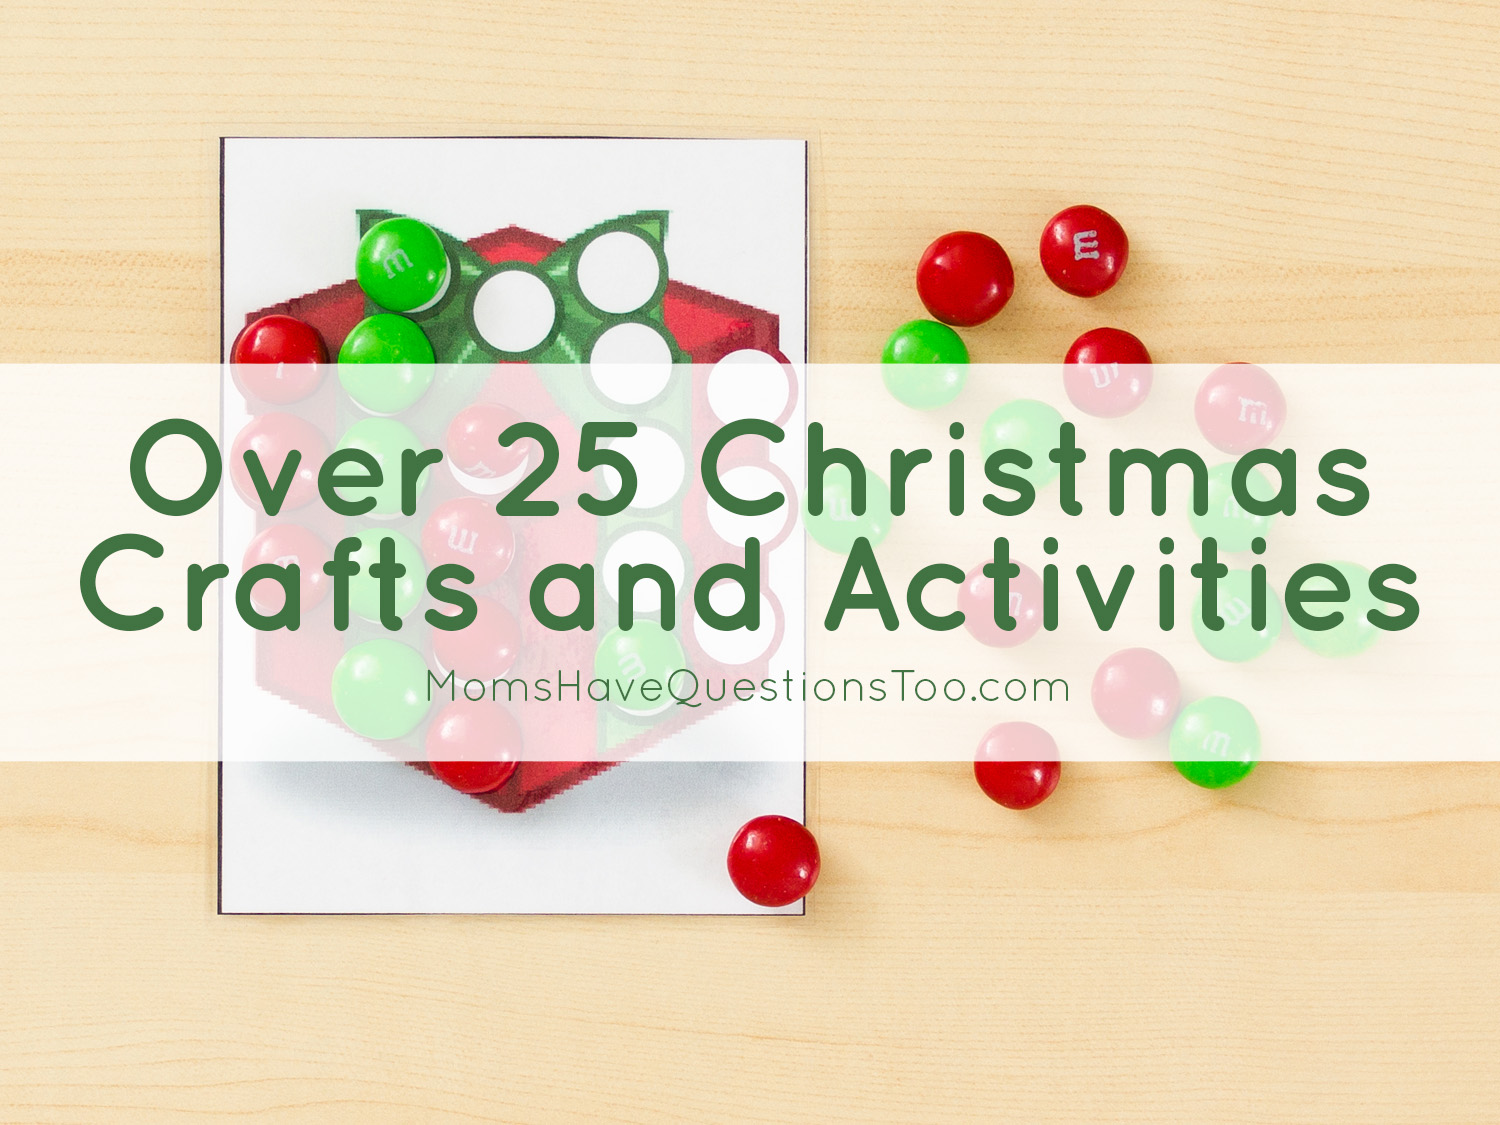 Over 25 Christmas Crafts and Activities - Moms Have Questions Too